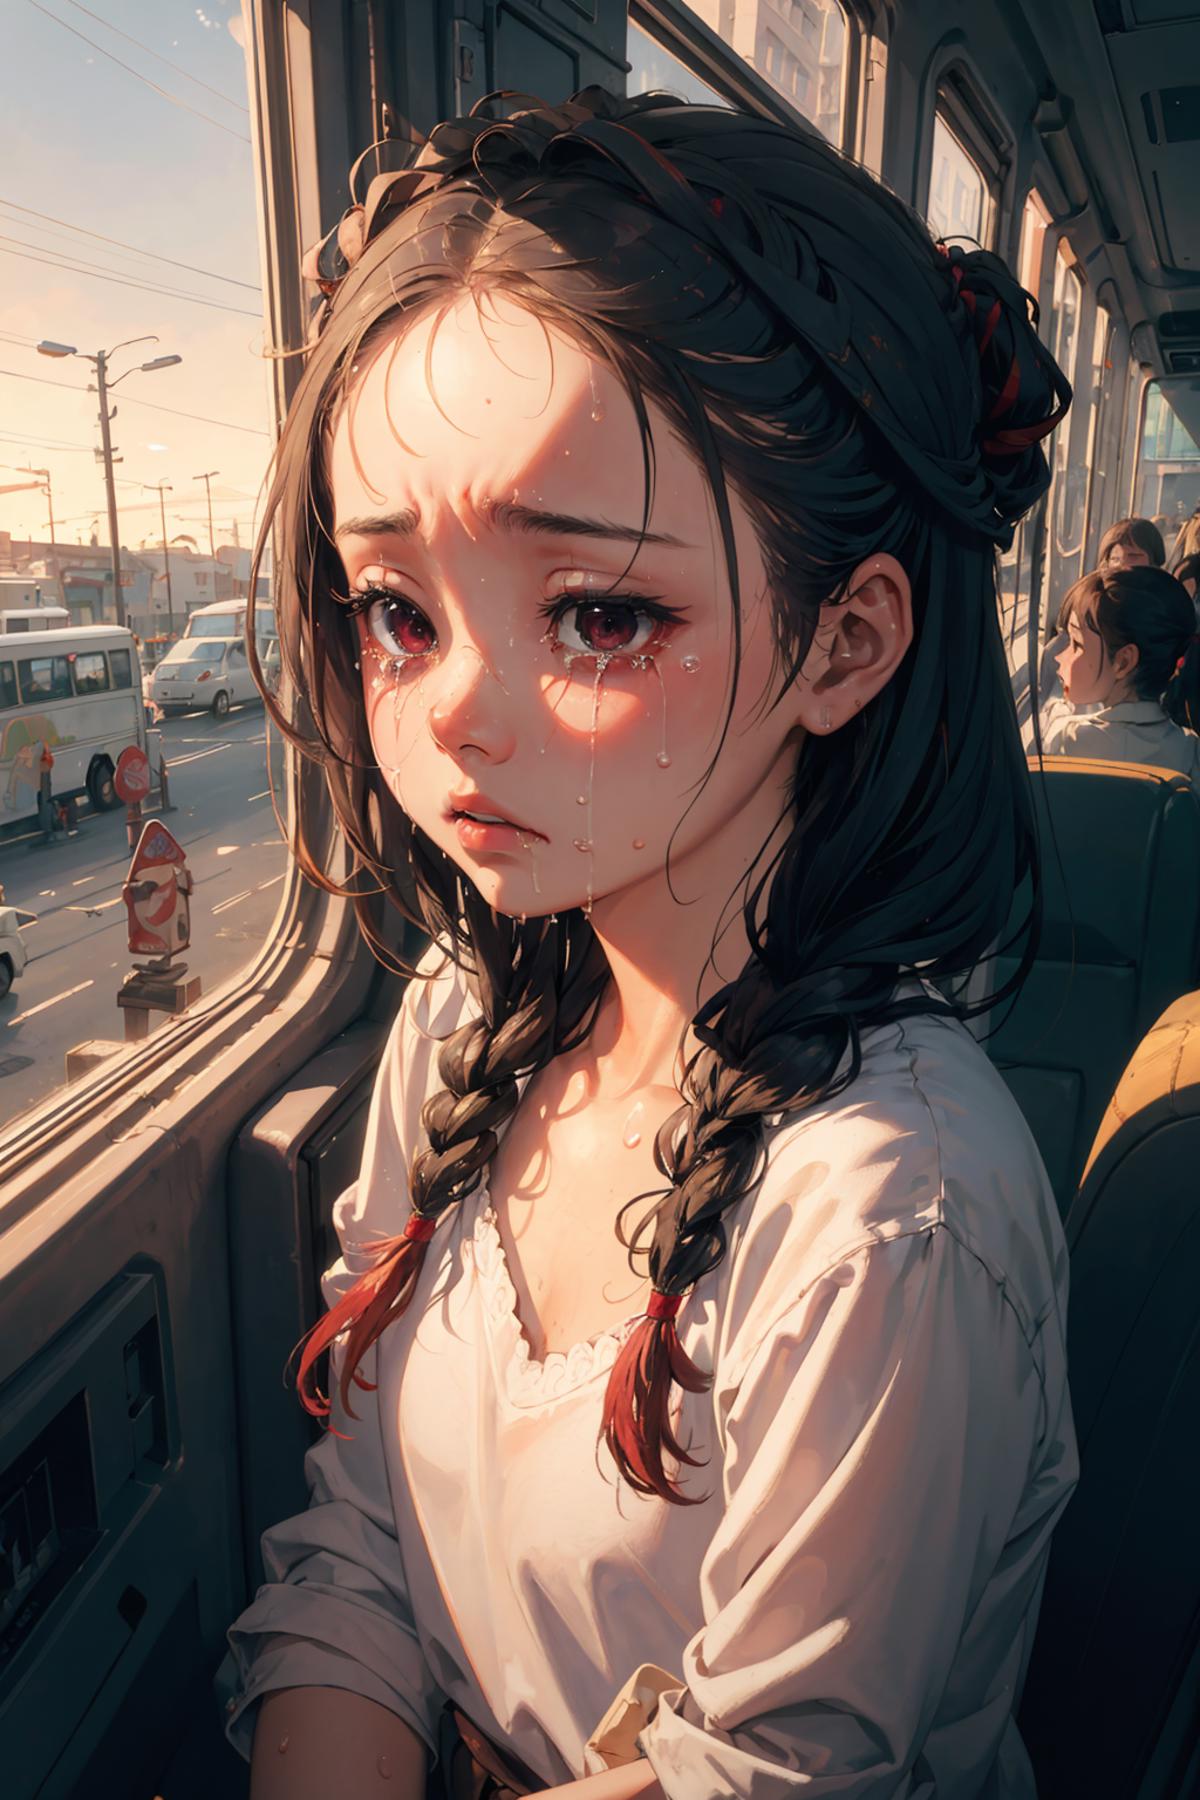 A girl with tears in her eyes looking out the window on a bus.